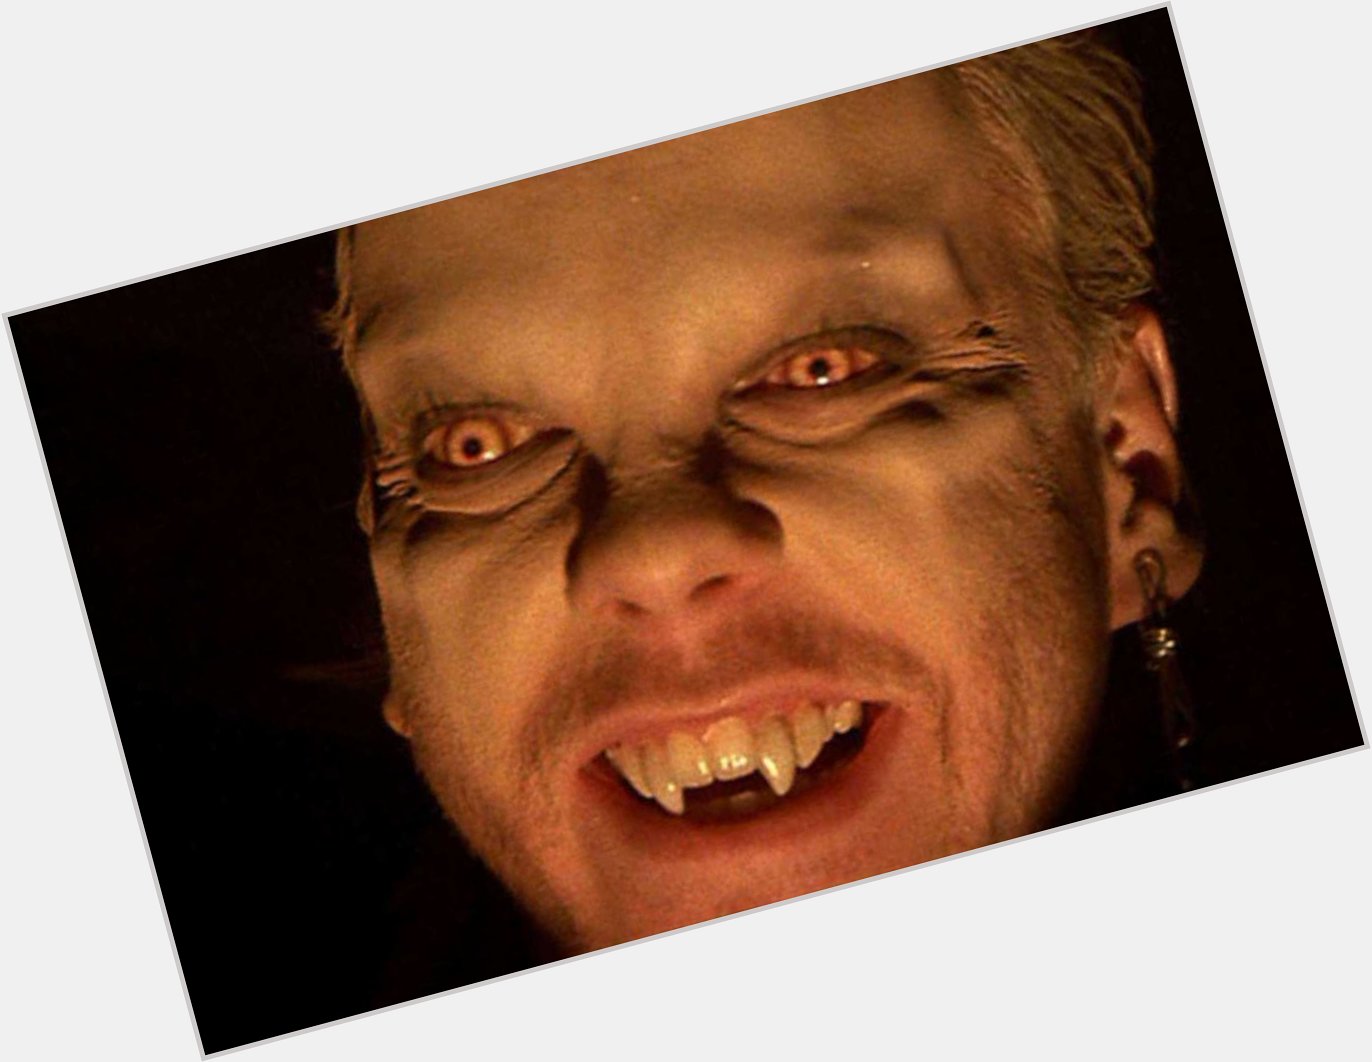 Happy 53rd birthday to Kiefer Sutherland, star of THE LOST BOYS, MIRRORS, STAND BY ME, FLATLINERS, and more! 